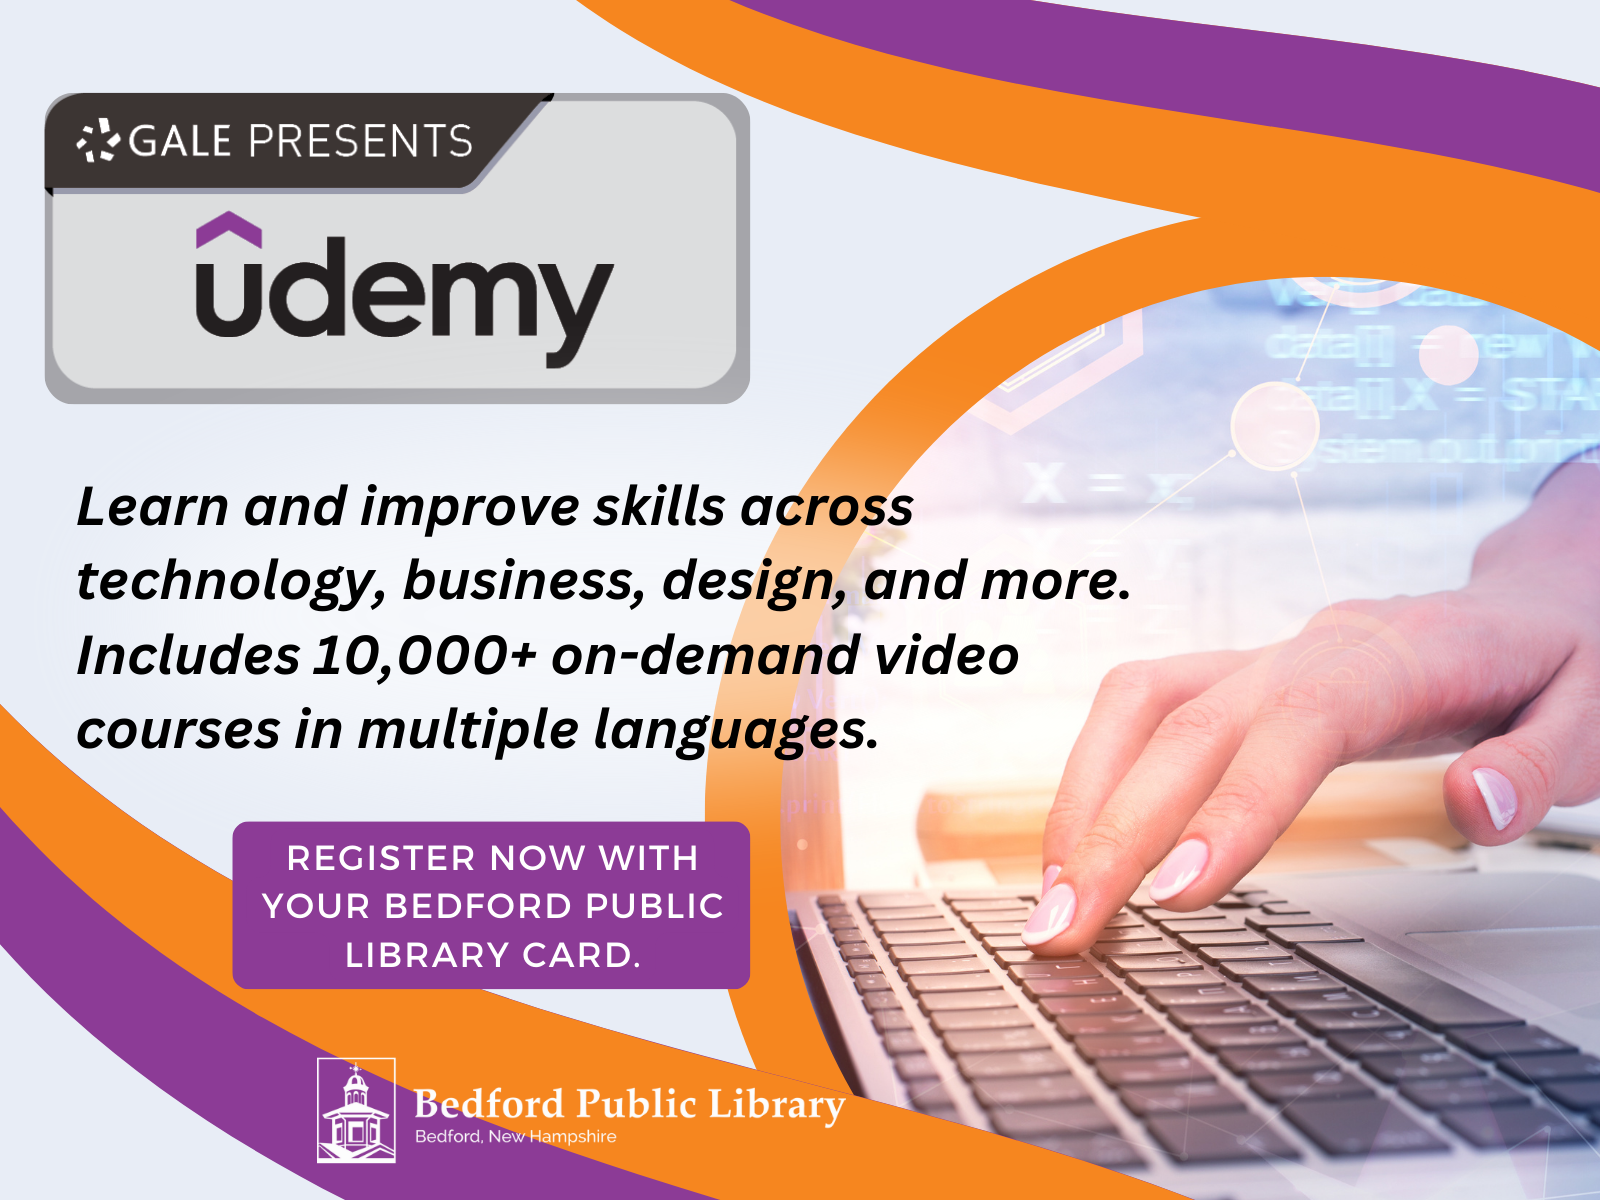 Gale Presents Udemy at the Bedford Public Library